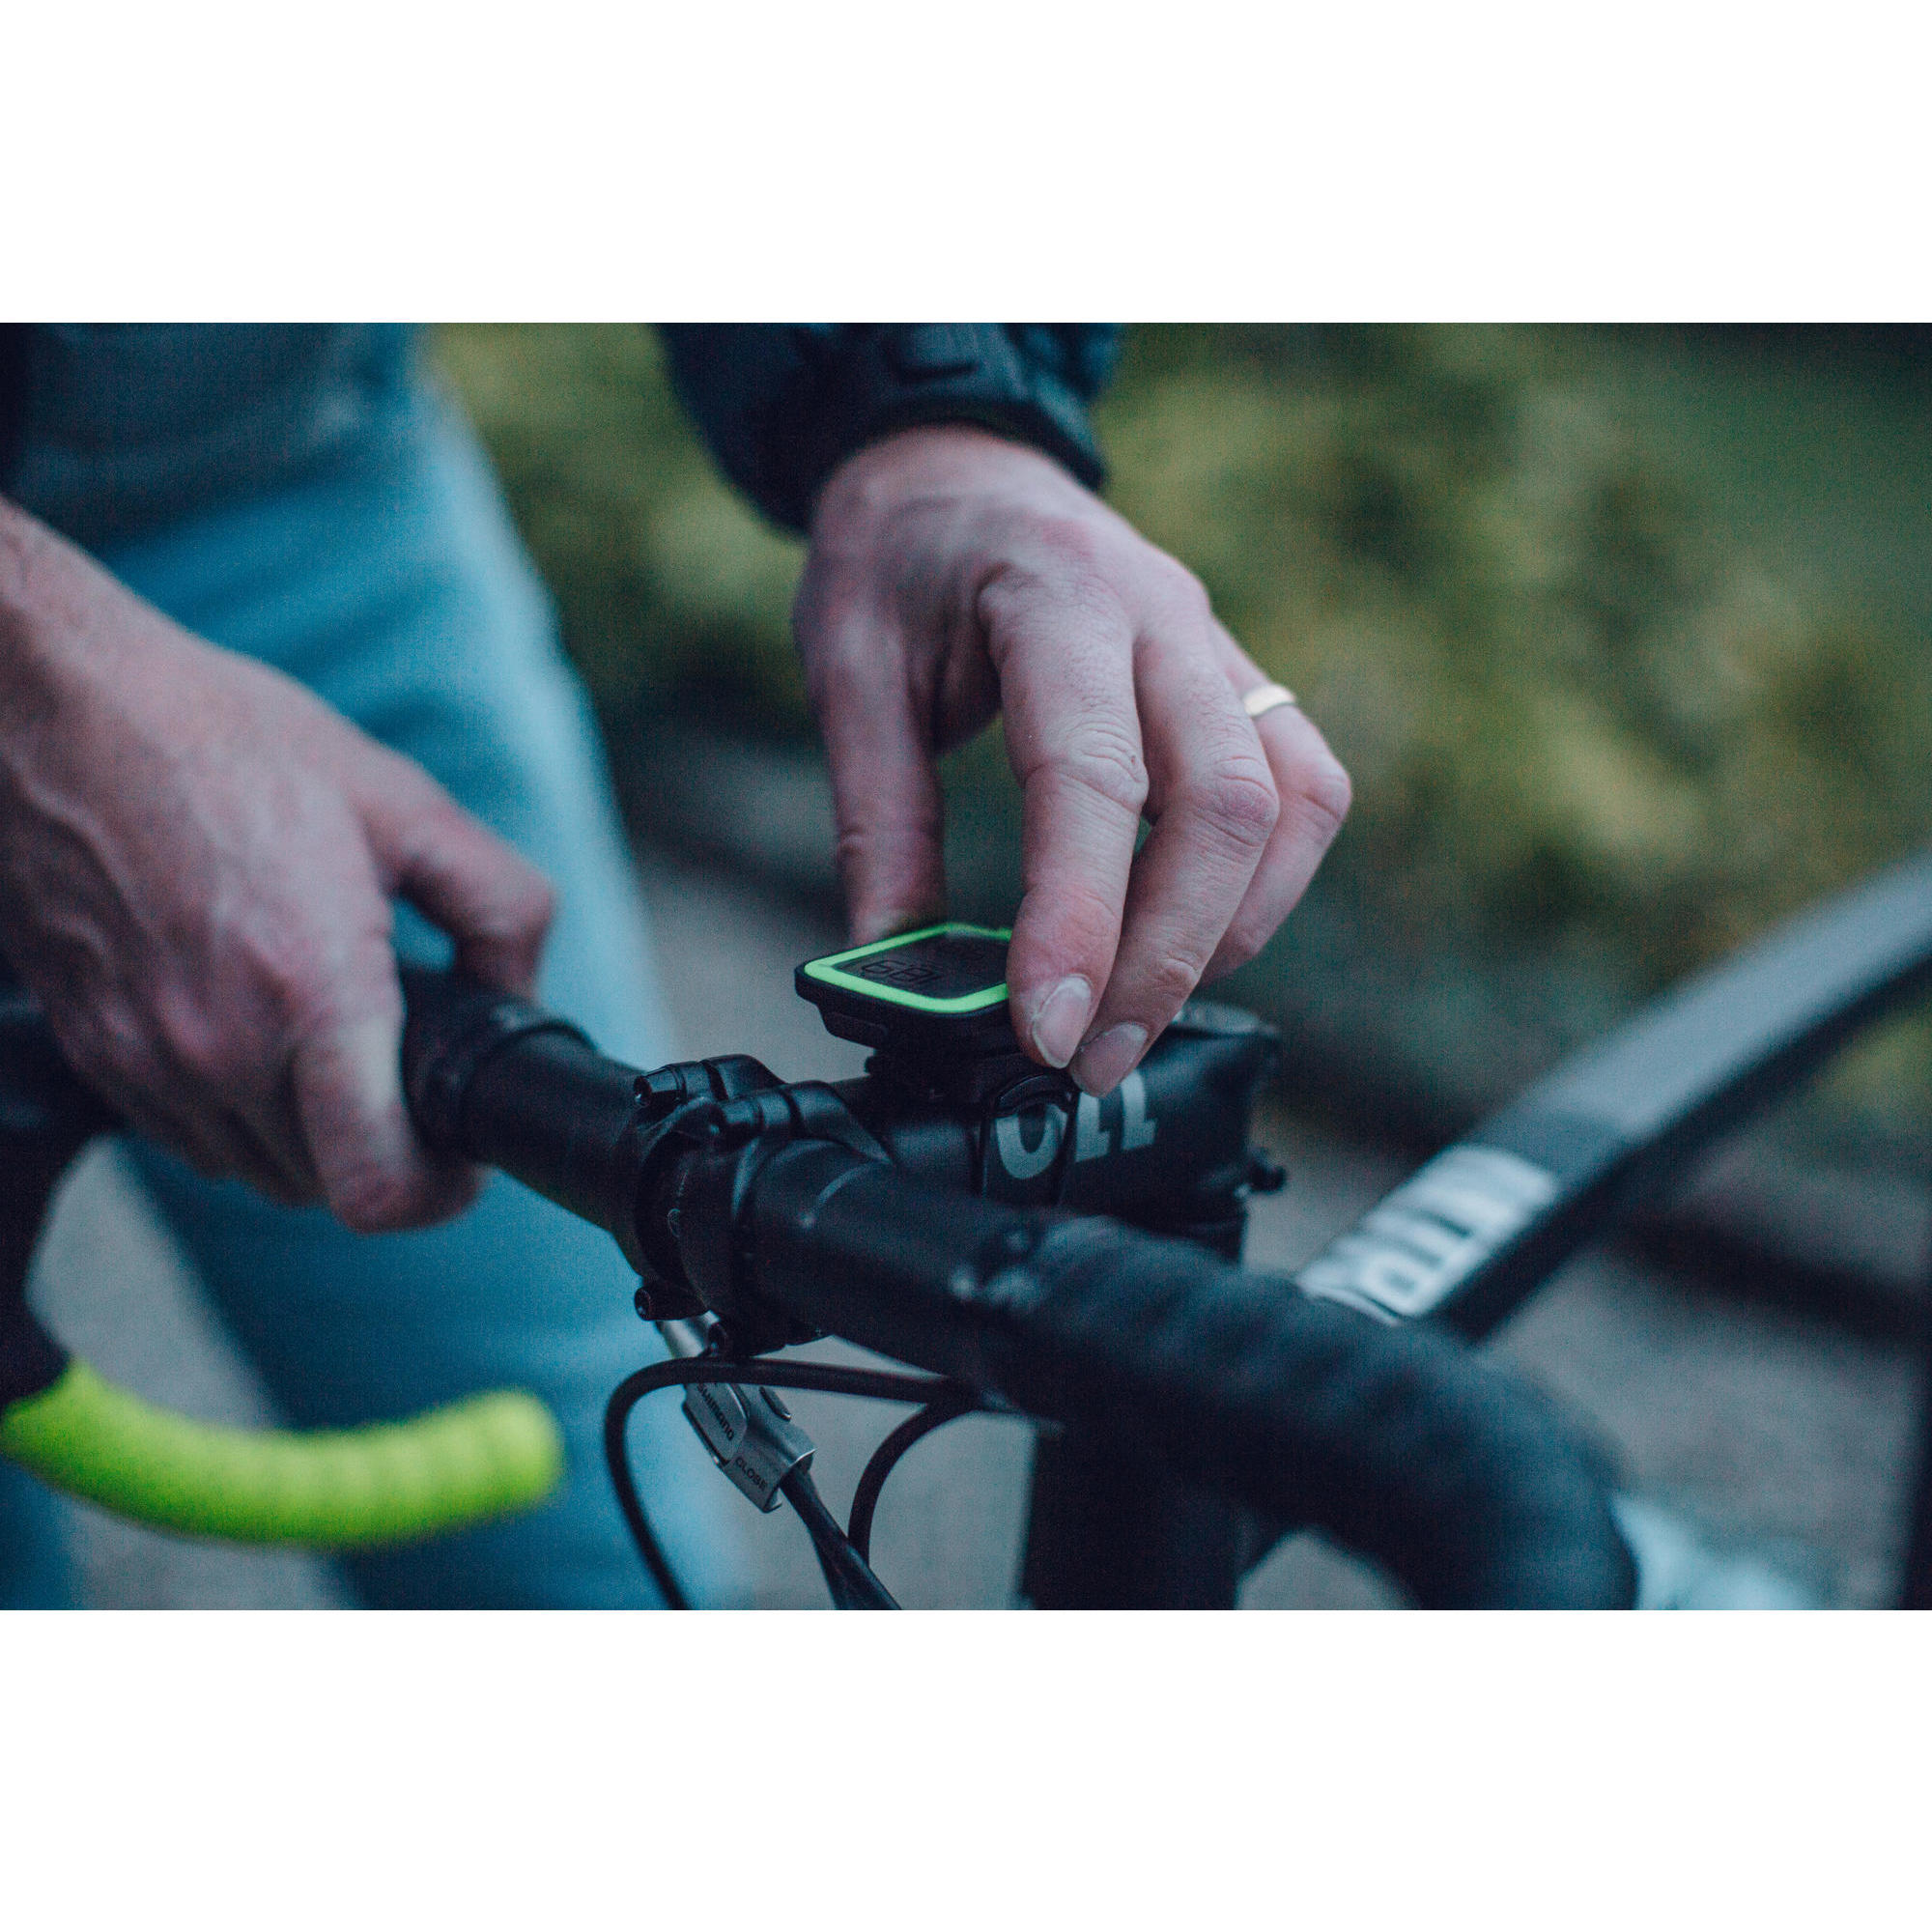 btwin 500 cyclometer review